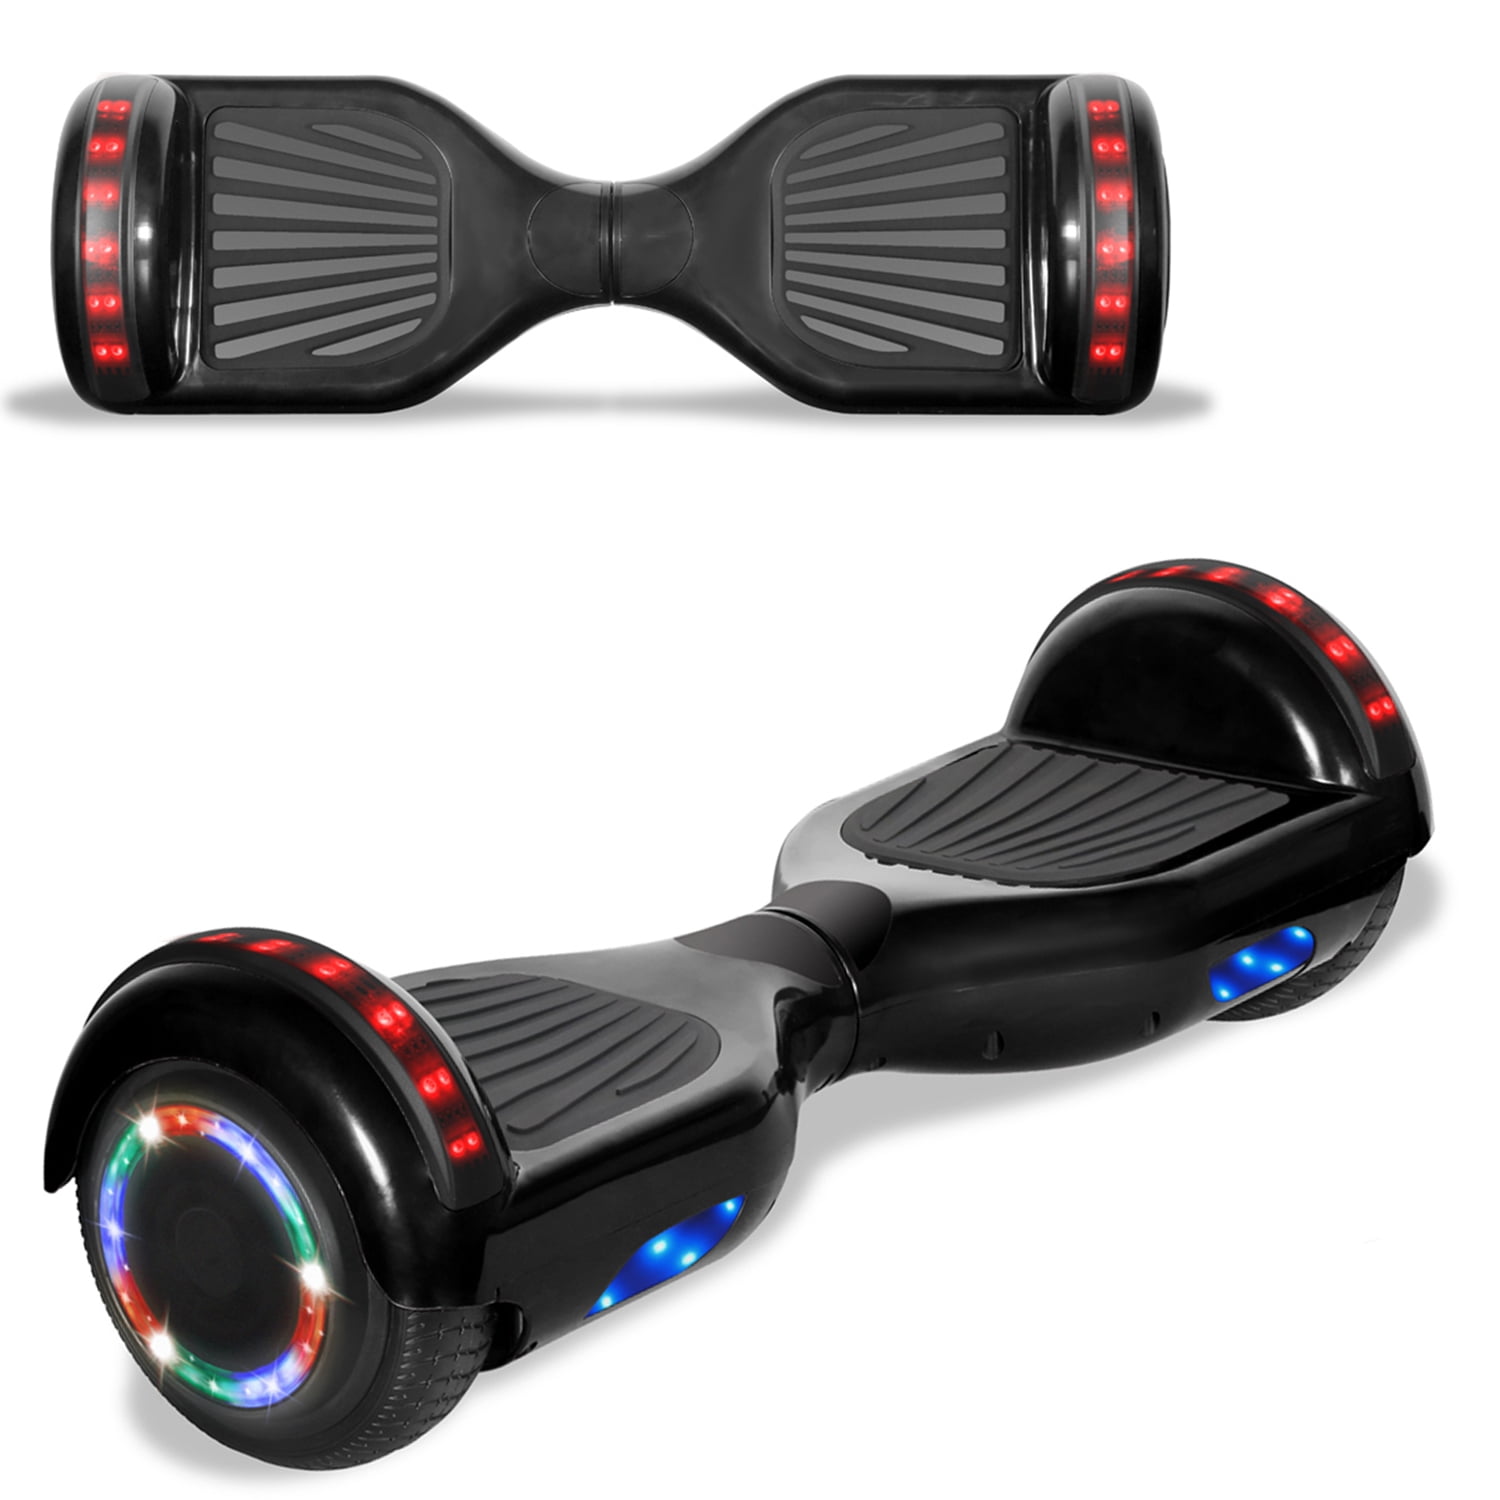 UL Certified TPS Hoverboard Self Balancing Scooter with Speaker LED Lights Flashing Wheels for Kids and Adults Hover Board